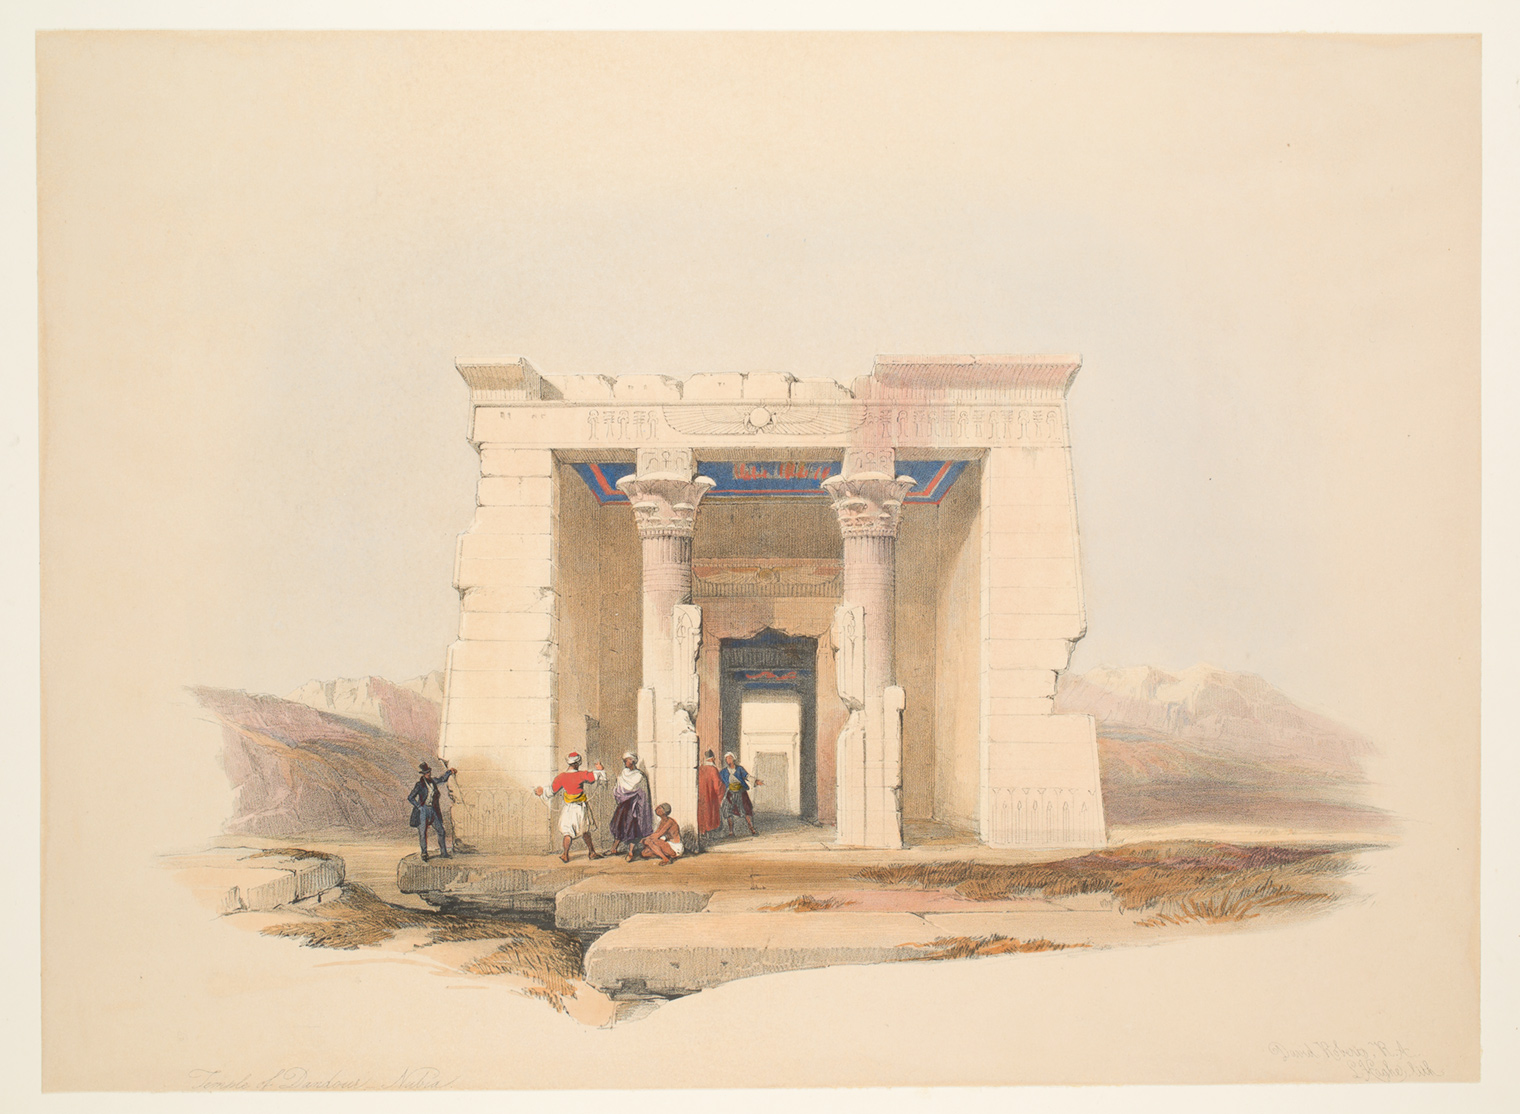 A watercolor painting depicting men outside the Temple of Dendur.